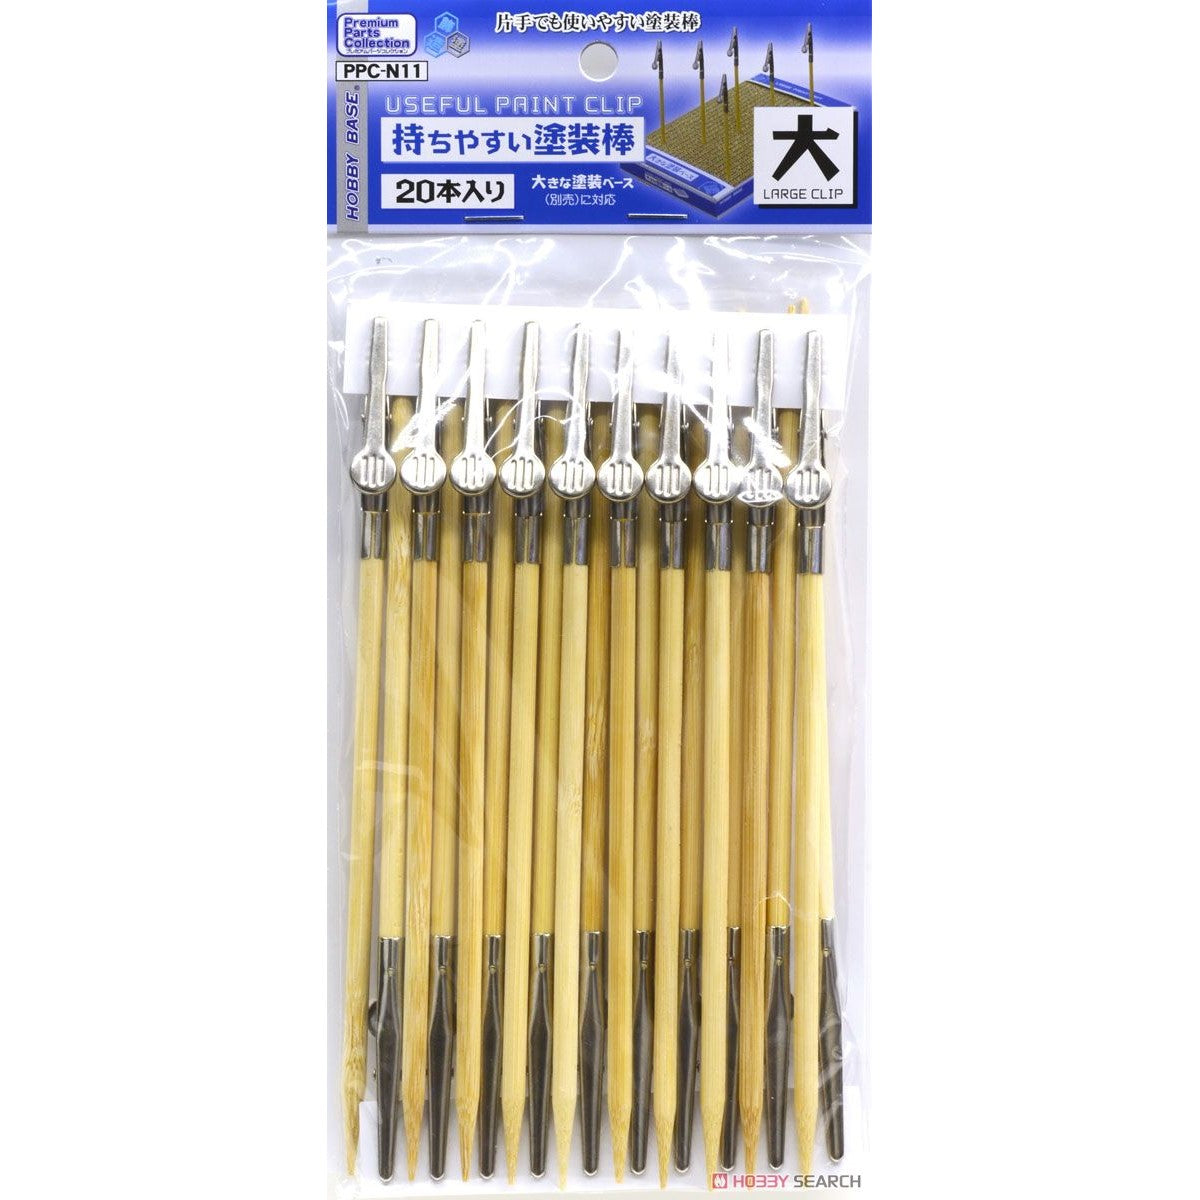 Hobby Base Useful Painting Clips Large (20) PPC-N11